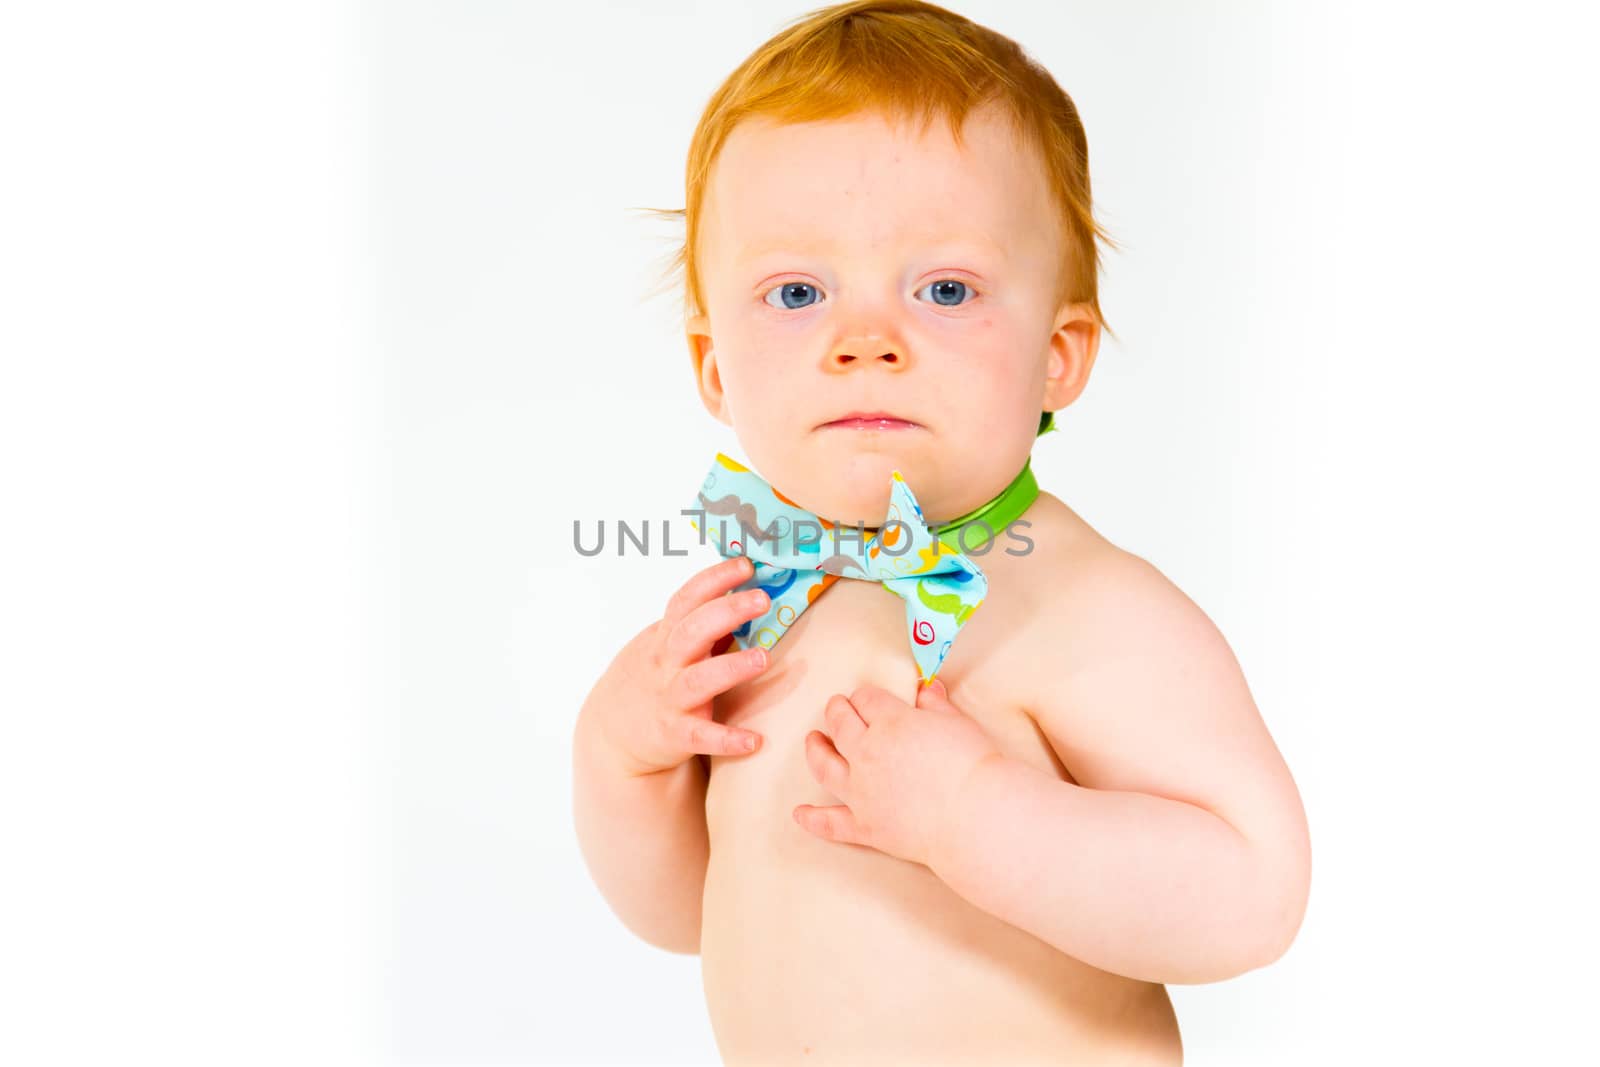 A one year old baby boy in the studio with a white background. The kid is wearing a bowtie and a diaper.